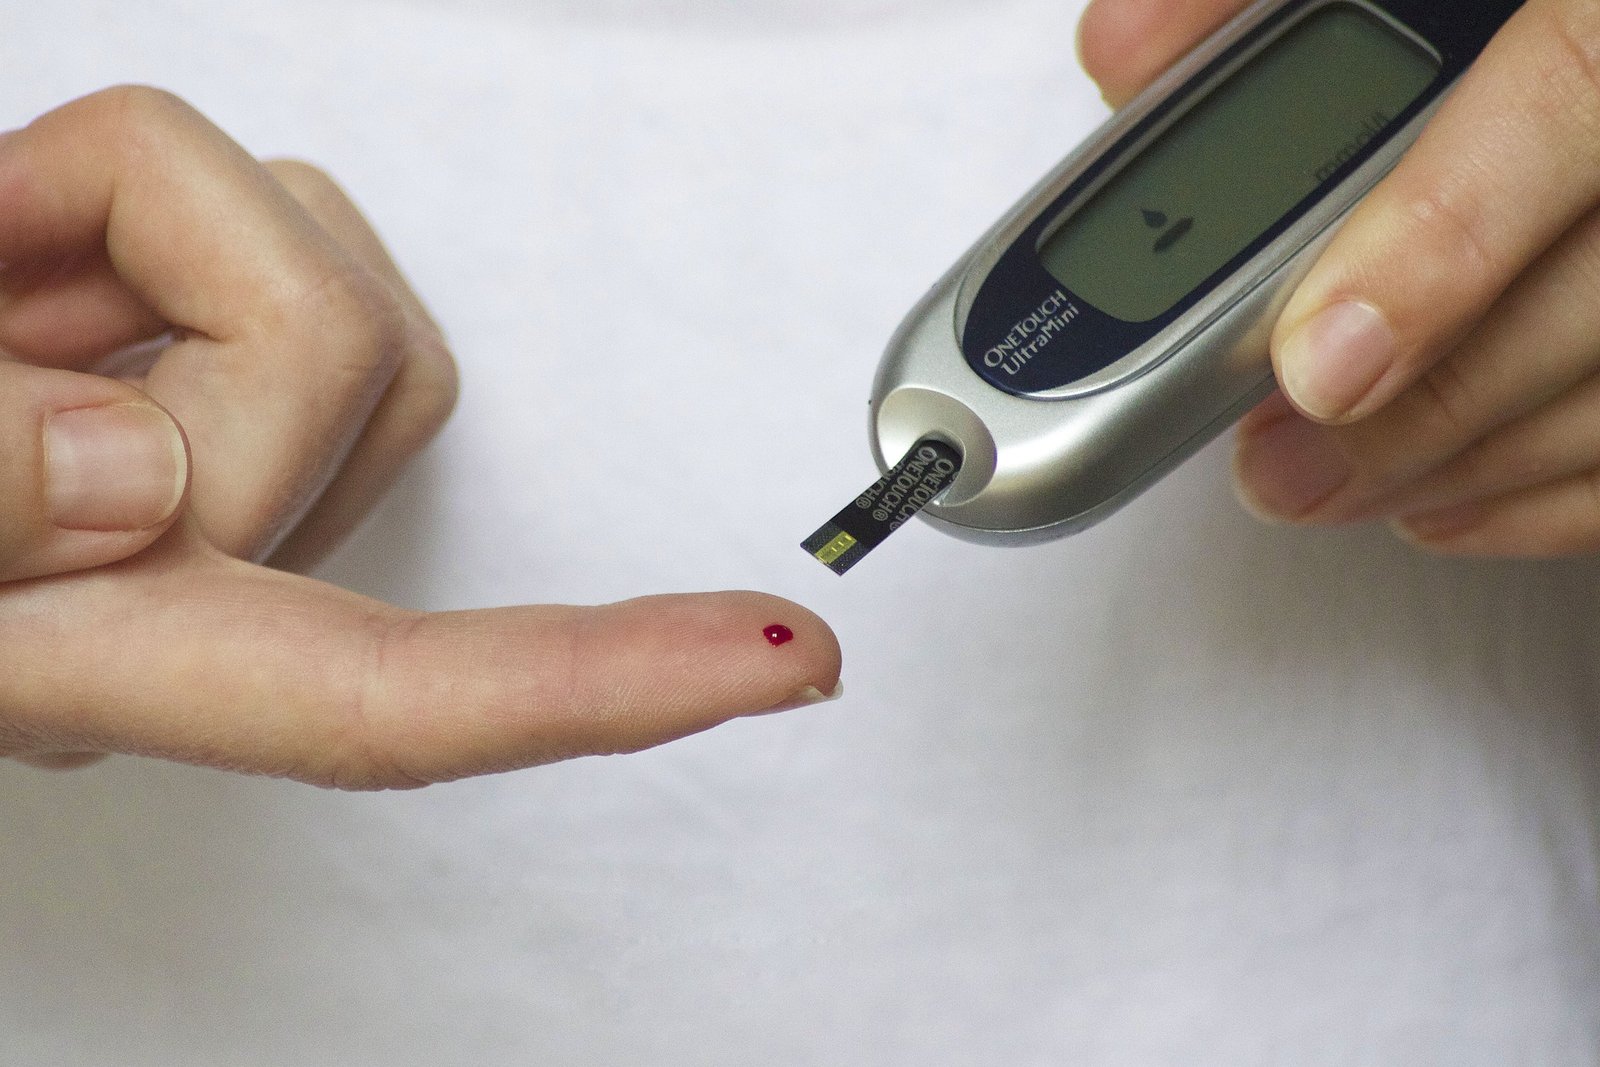 Reversing Diabetes: The Critical Link Between a Fatty Liver and Insulin Resistance